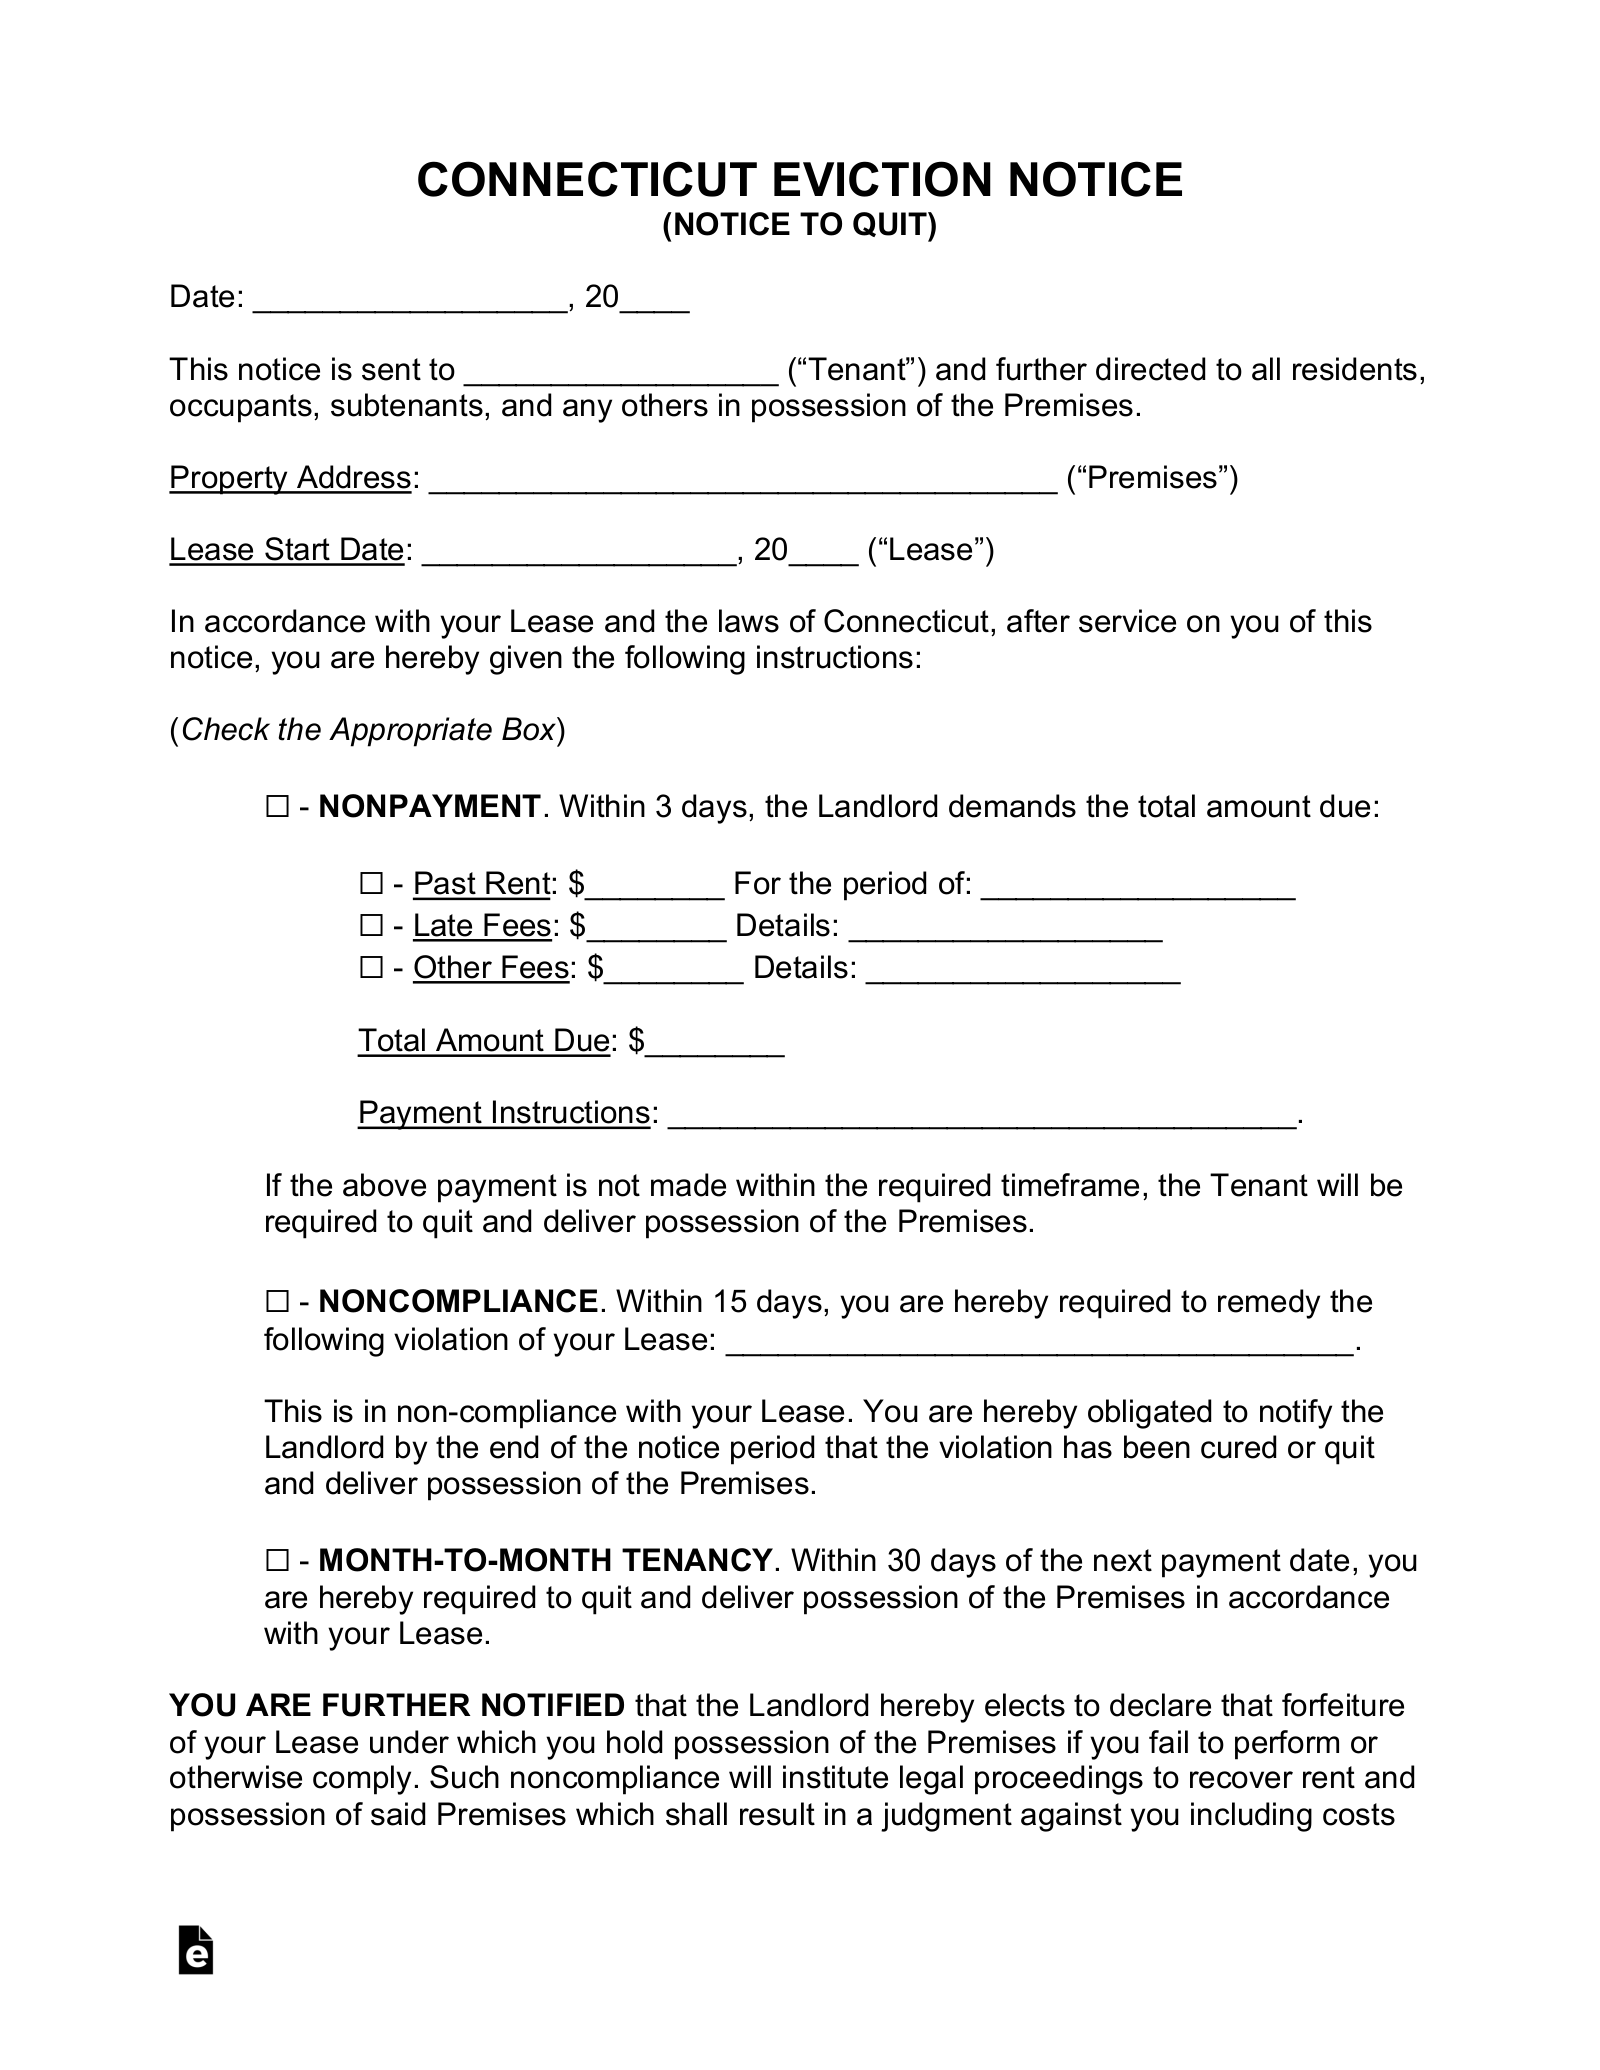 Connecticut Eviction Notice Forms (2)